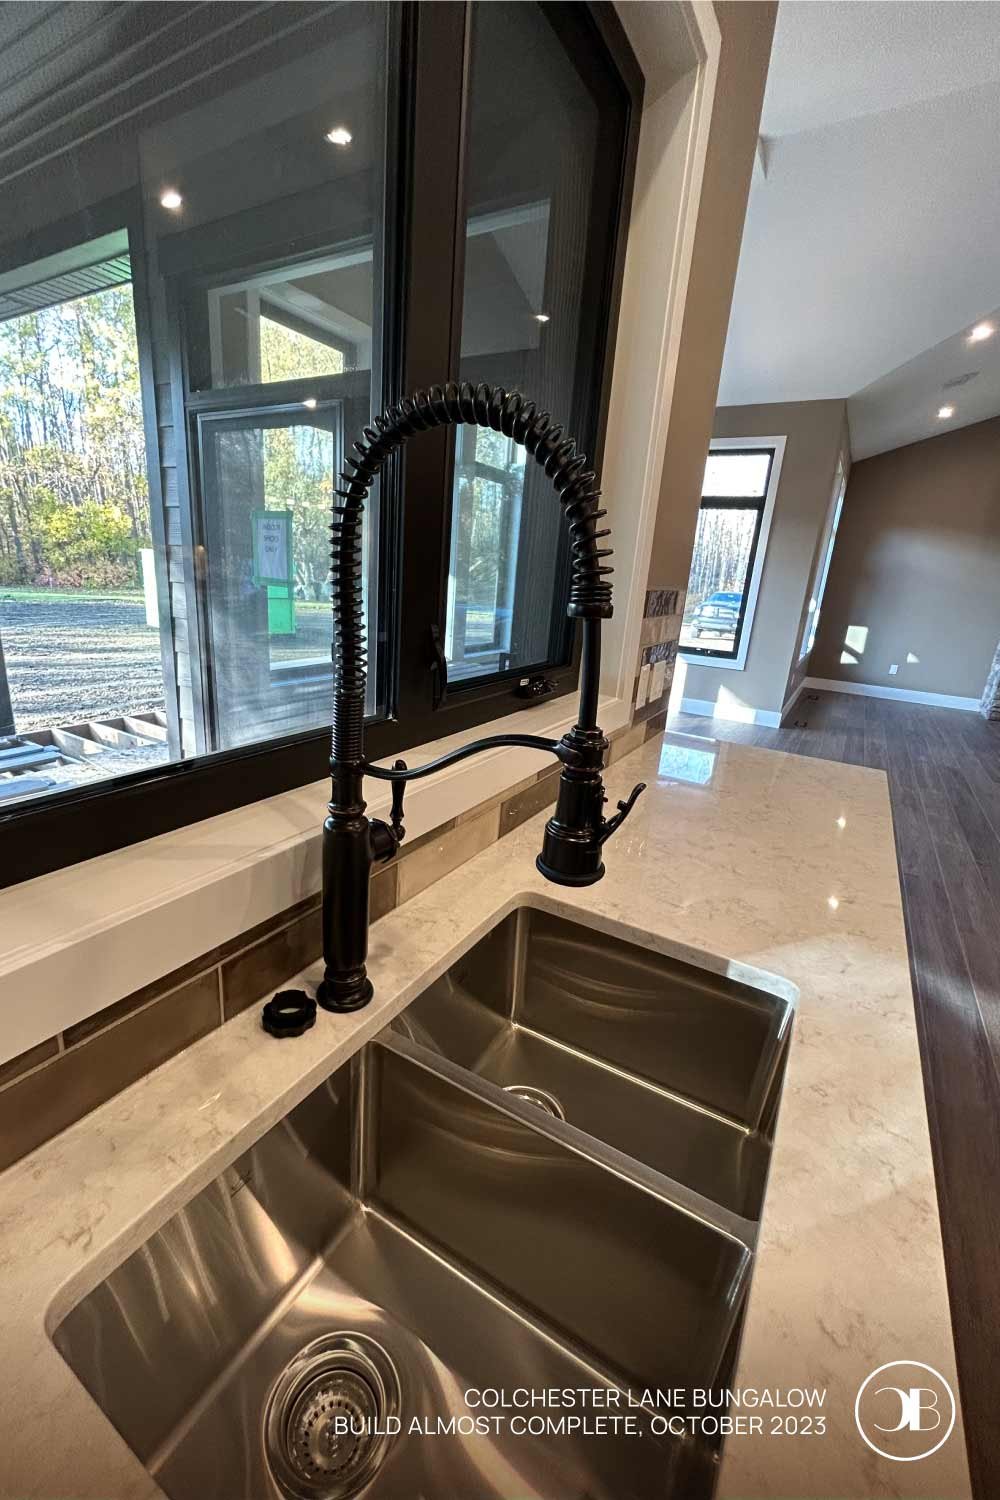 Scenic sinks: Where every dish comes with a view. Build almost complete for Colchester Lane Bungalow, by Carson Built Homes.